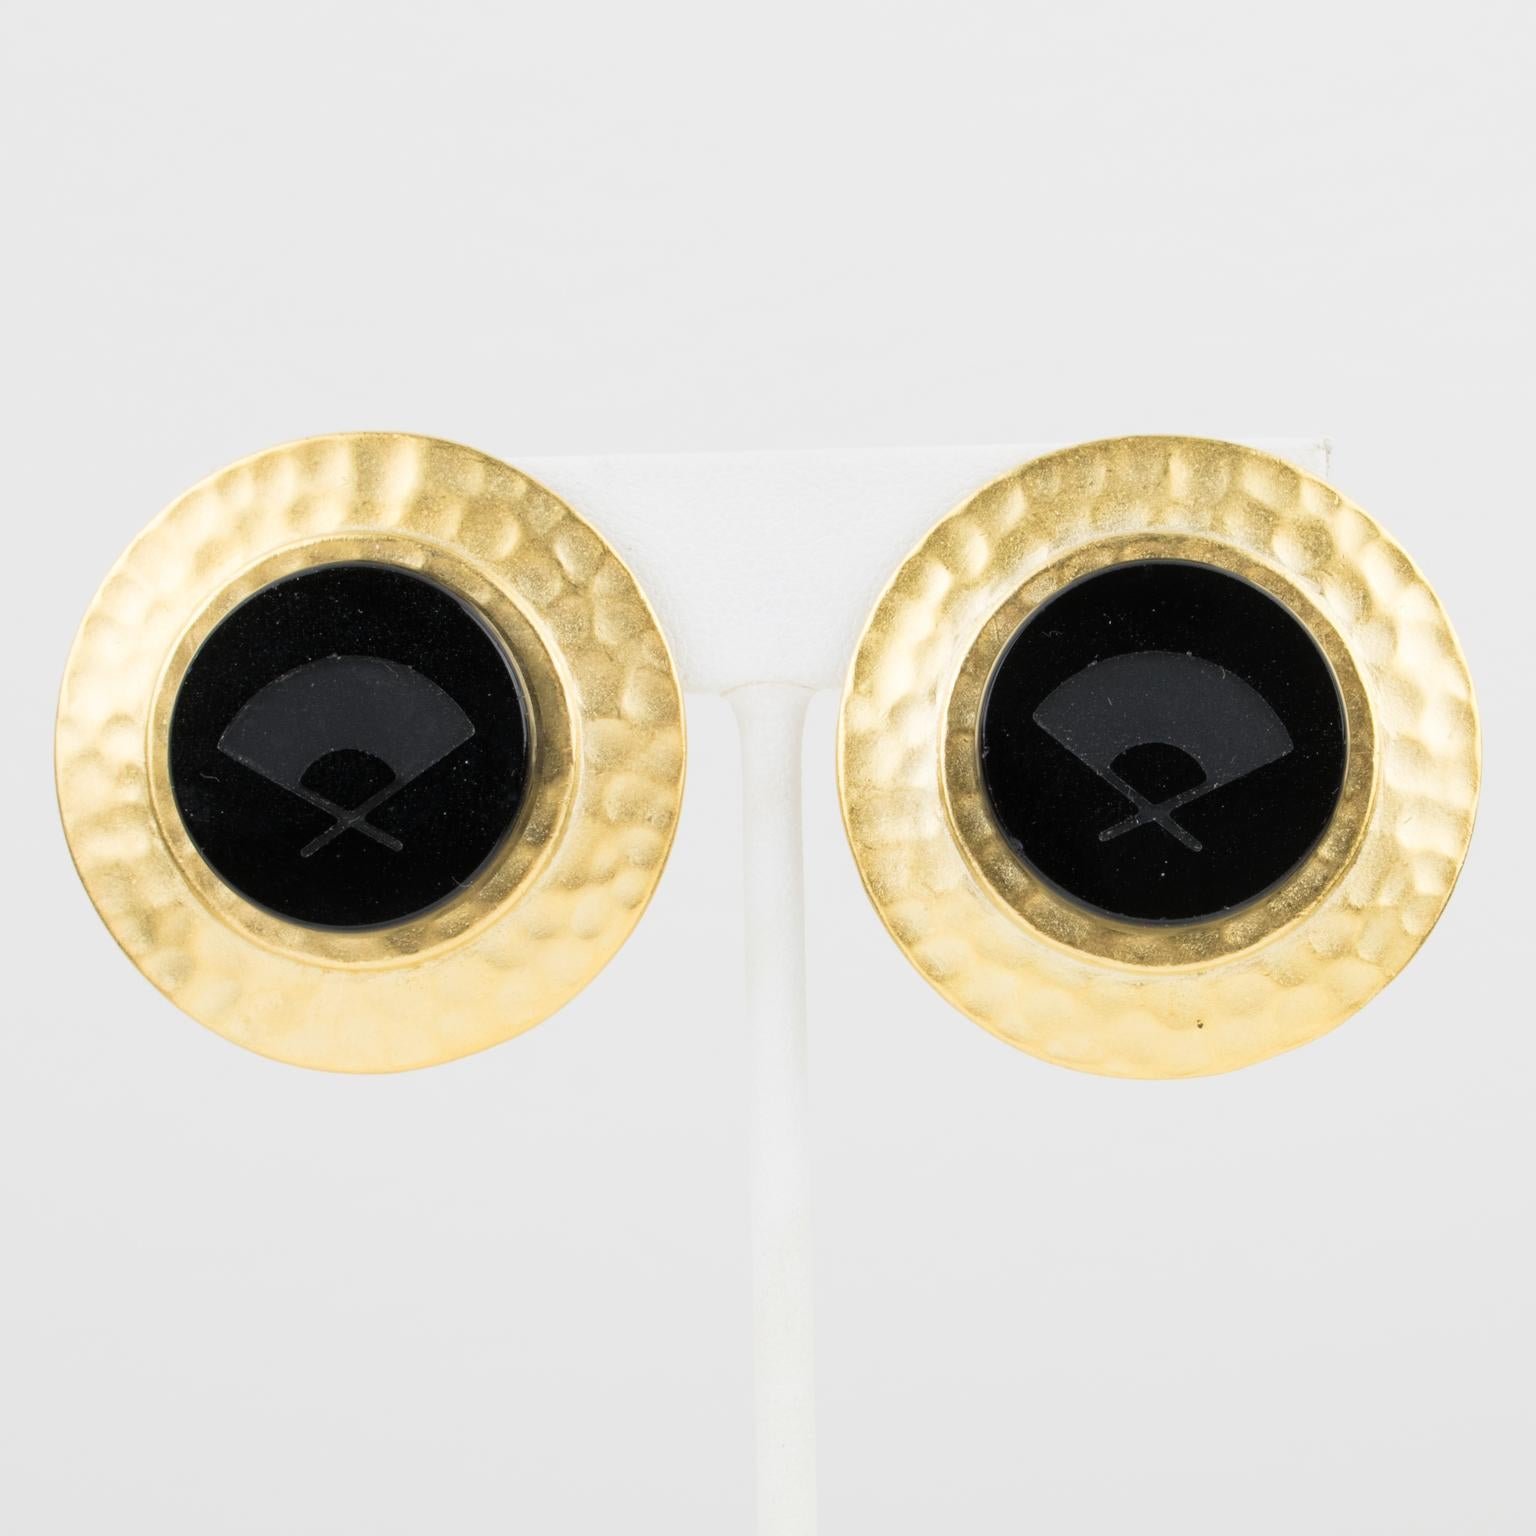 Karl Lagerfeld Paris designed these lovely clip-on earrings. The pieces feature a round gilt metal framing with texture, topped with a black glass intaglio ornate with the designer fan emblem carved logo.
Measurements: 1.44 in diameter (3.7 cm).